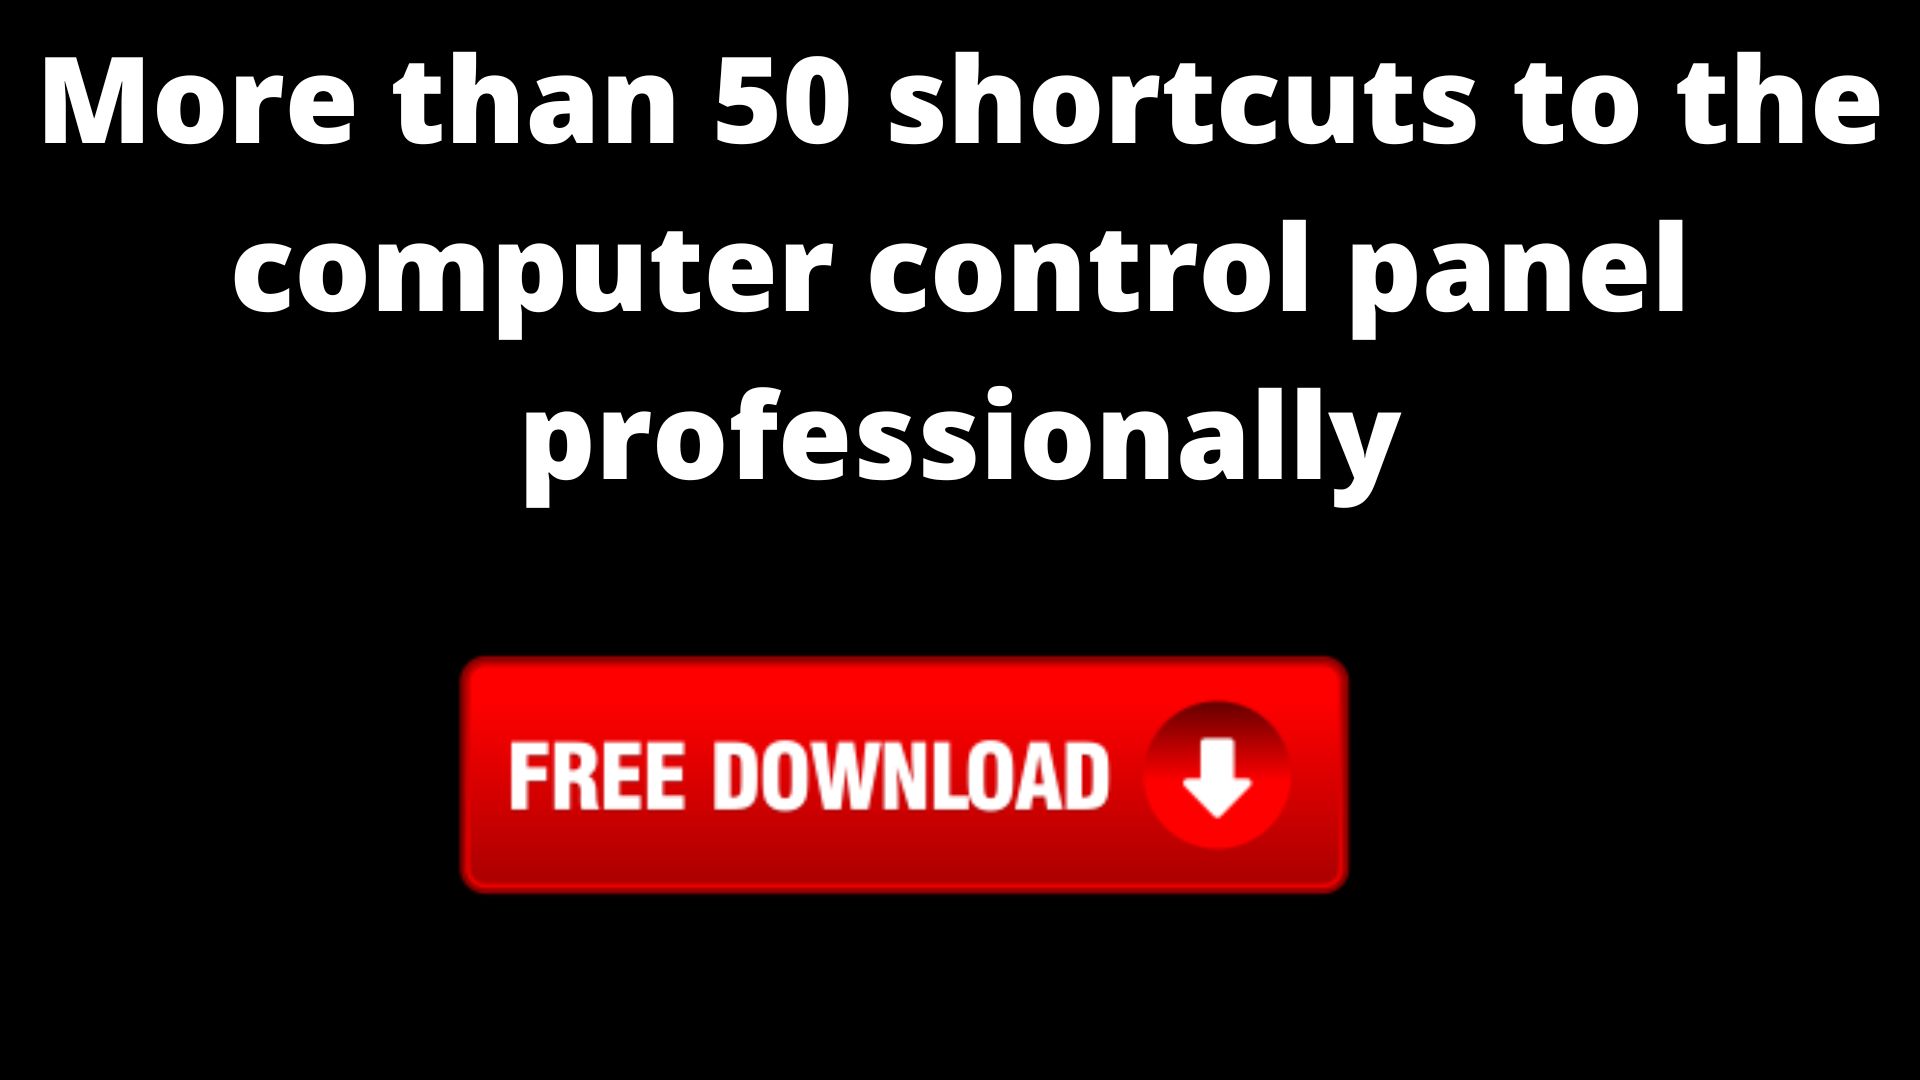 More Than 50 Shortcuts To The Computer Control Panel Professionally